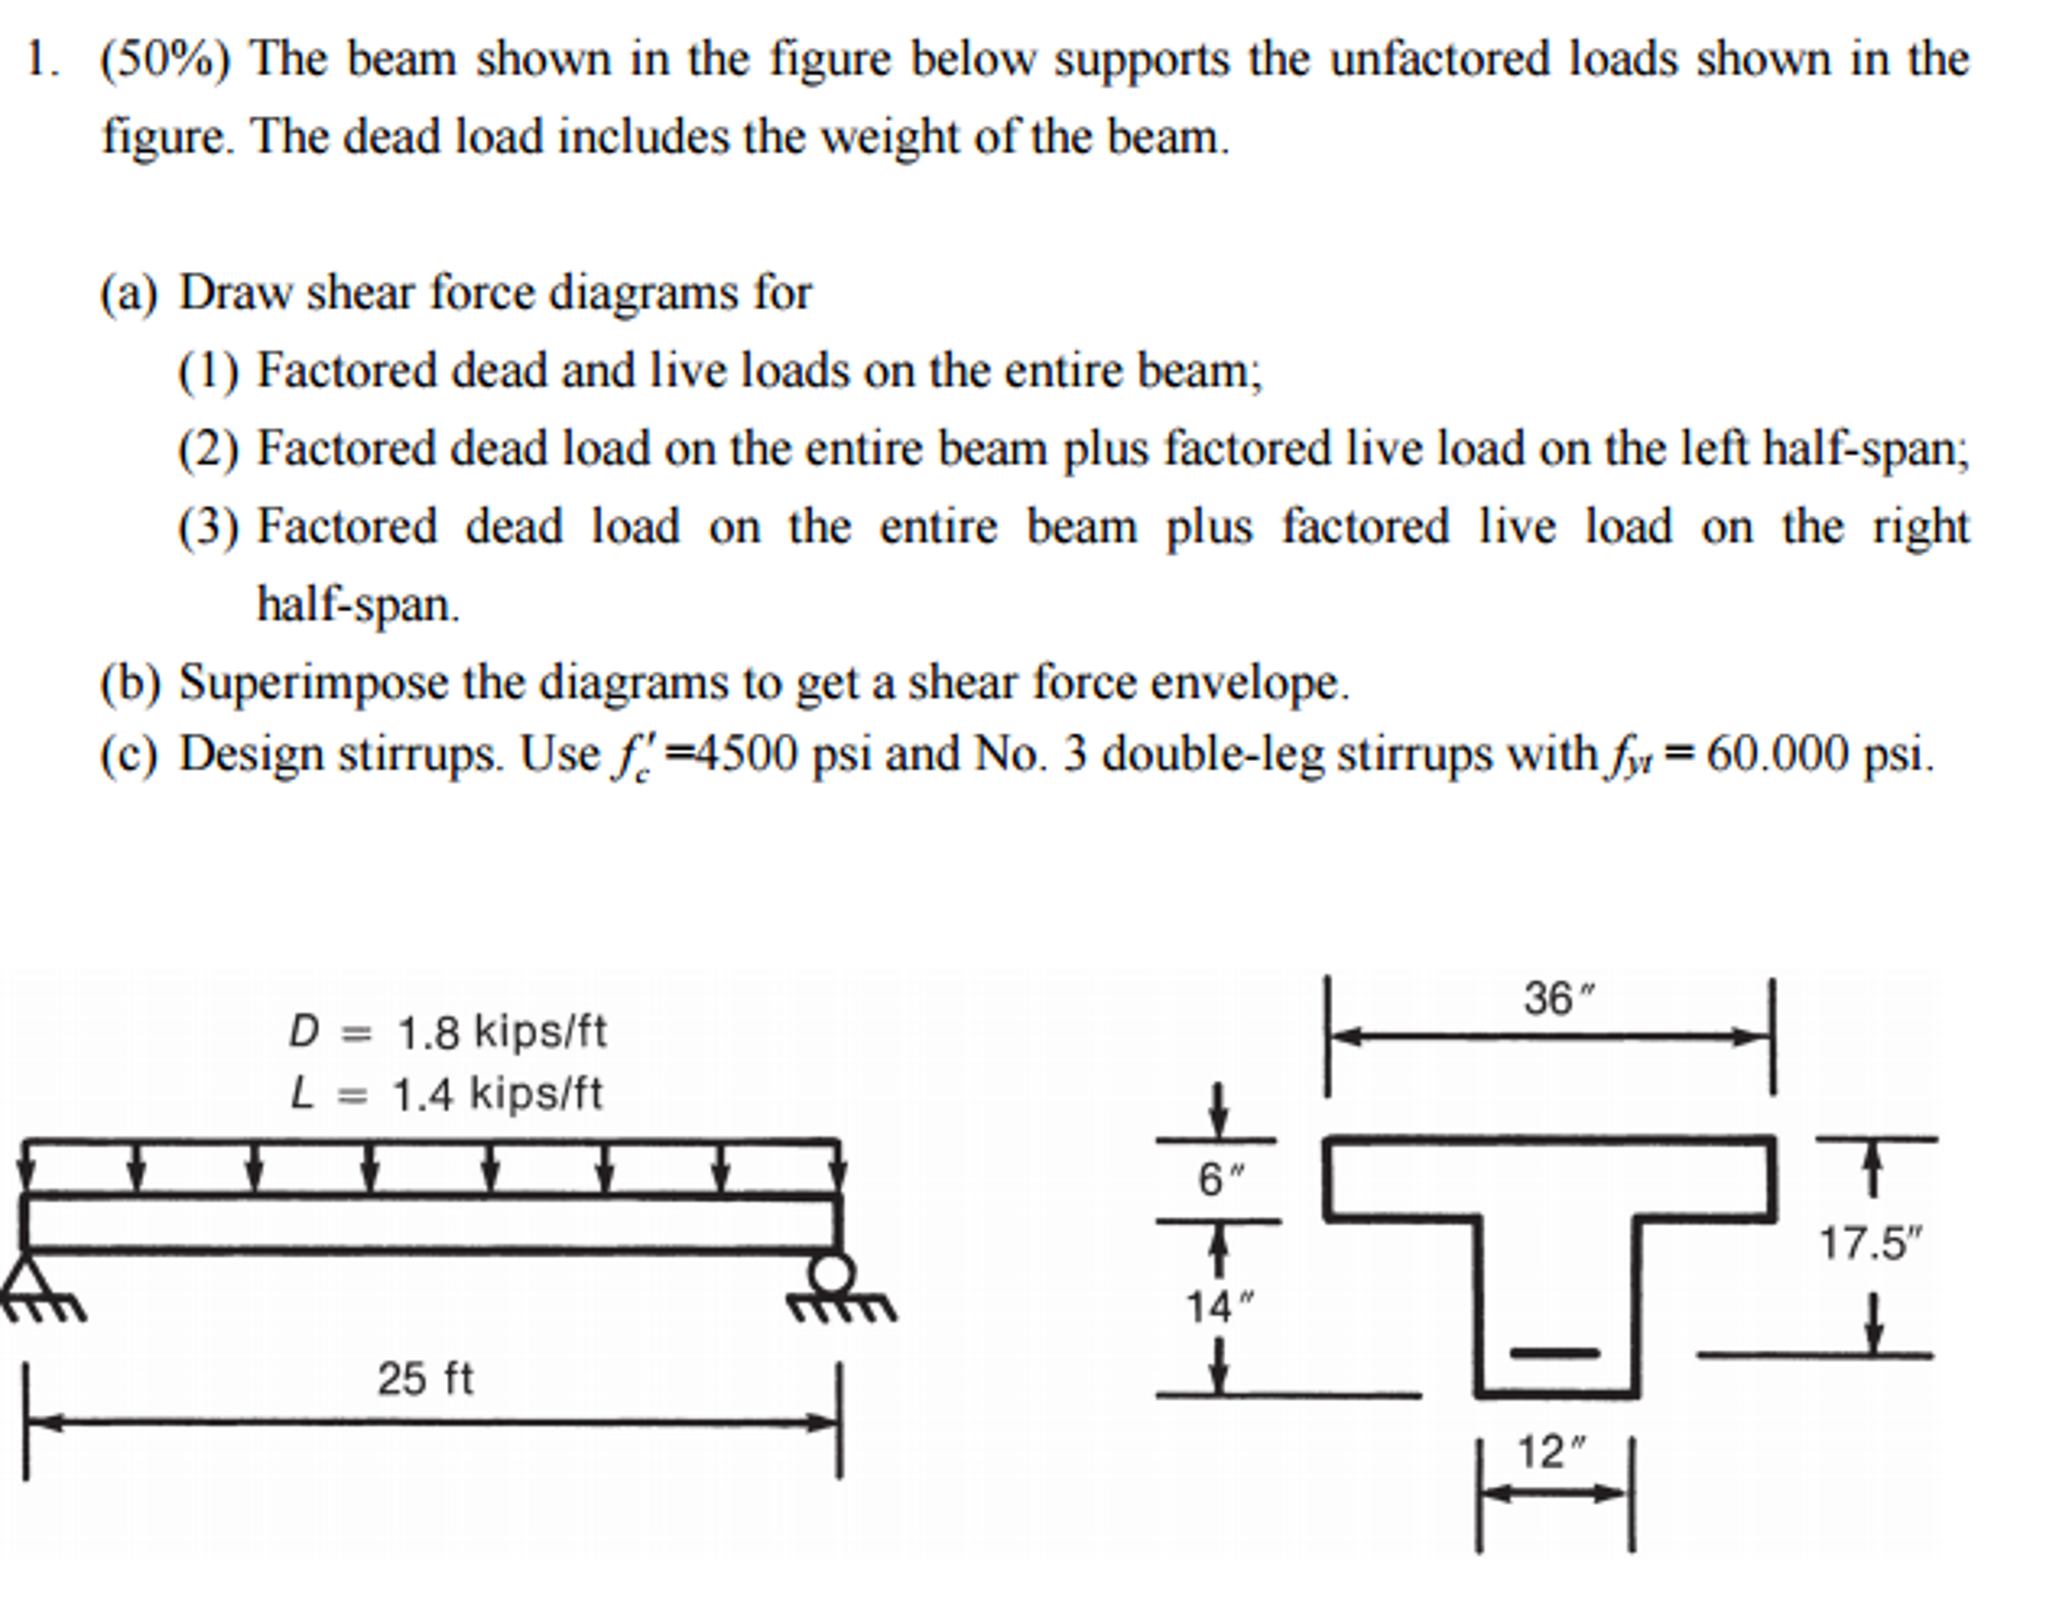 how to calculate dead load and live load of beam